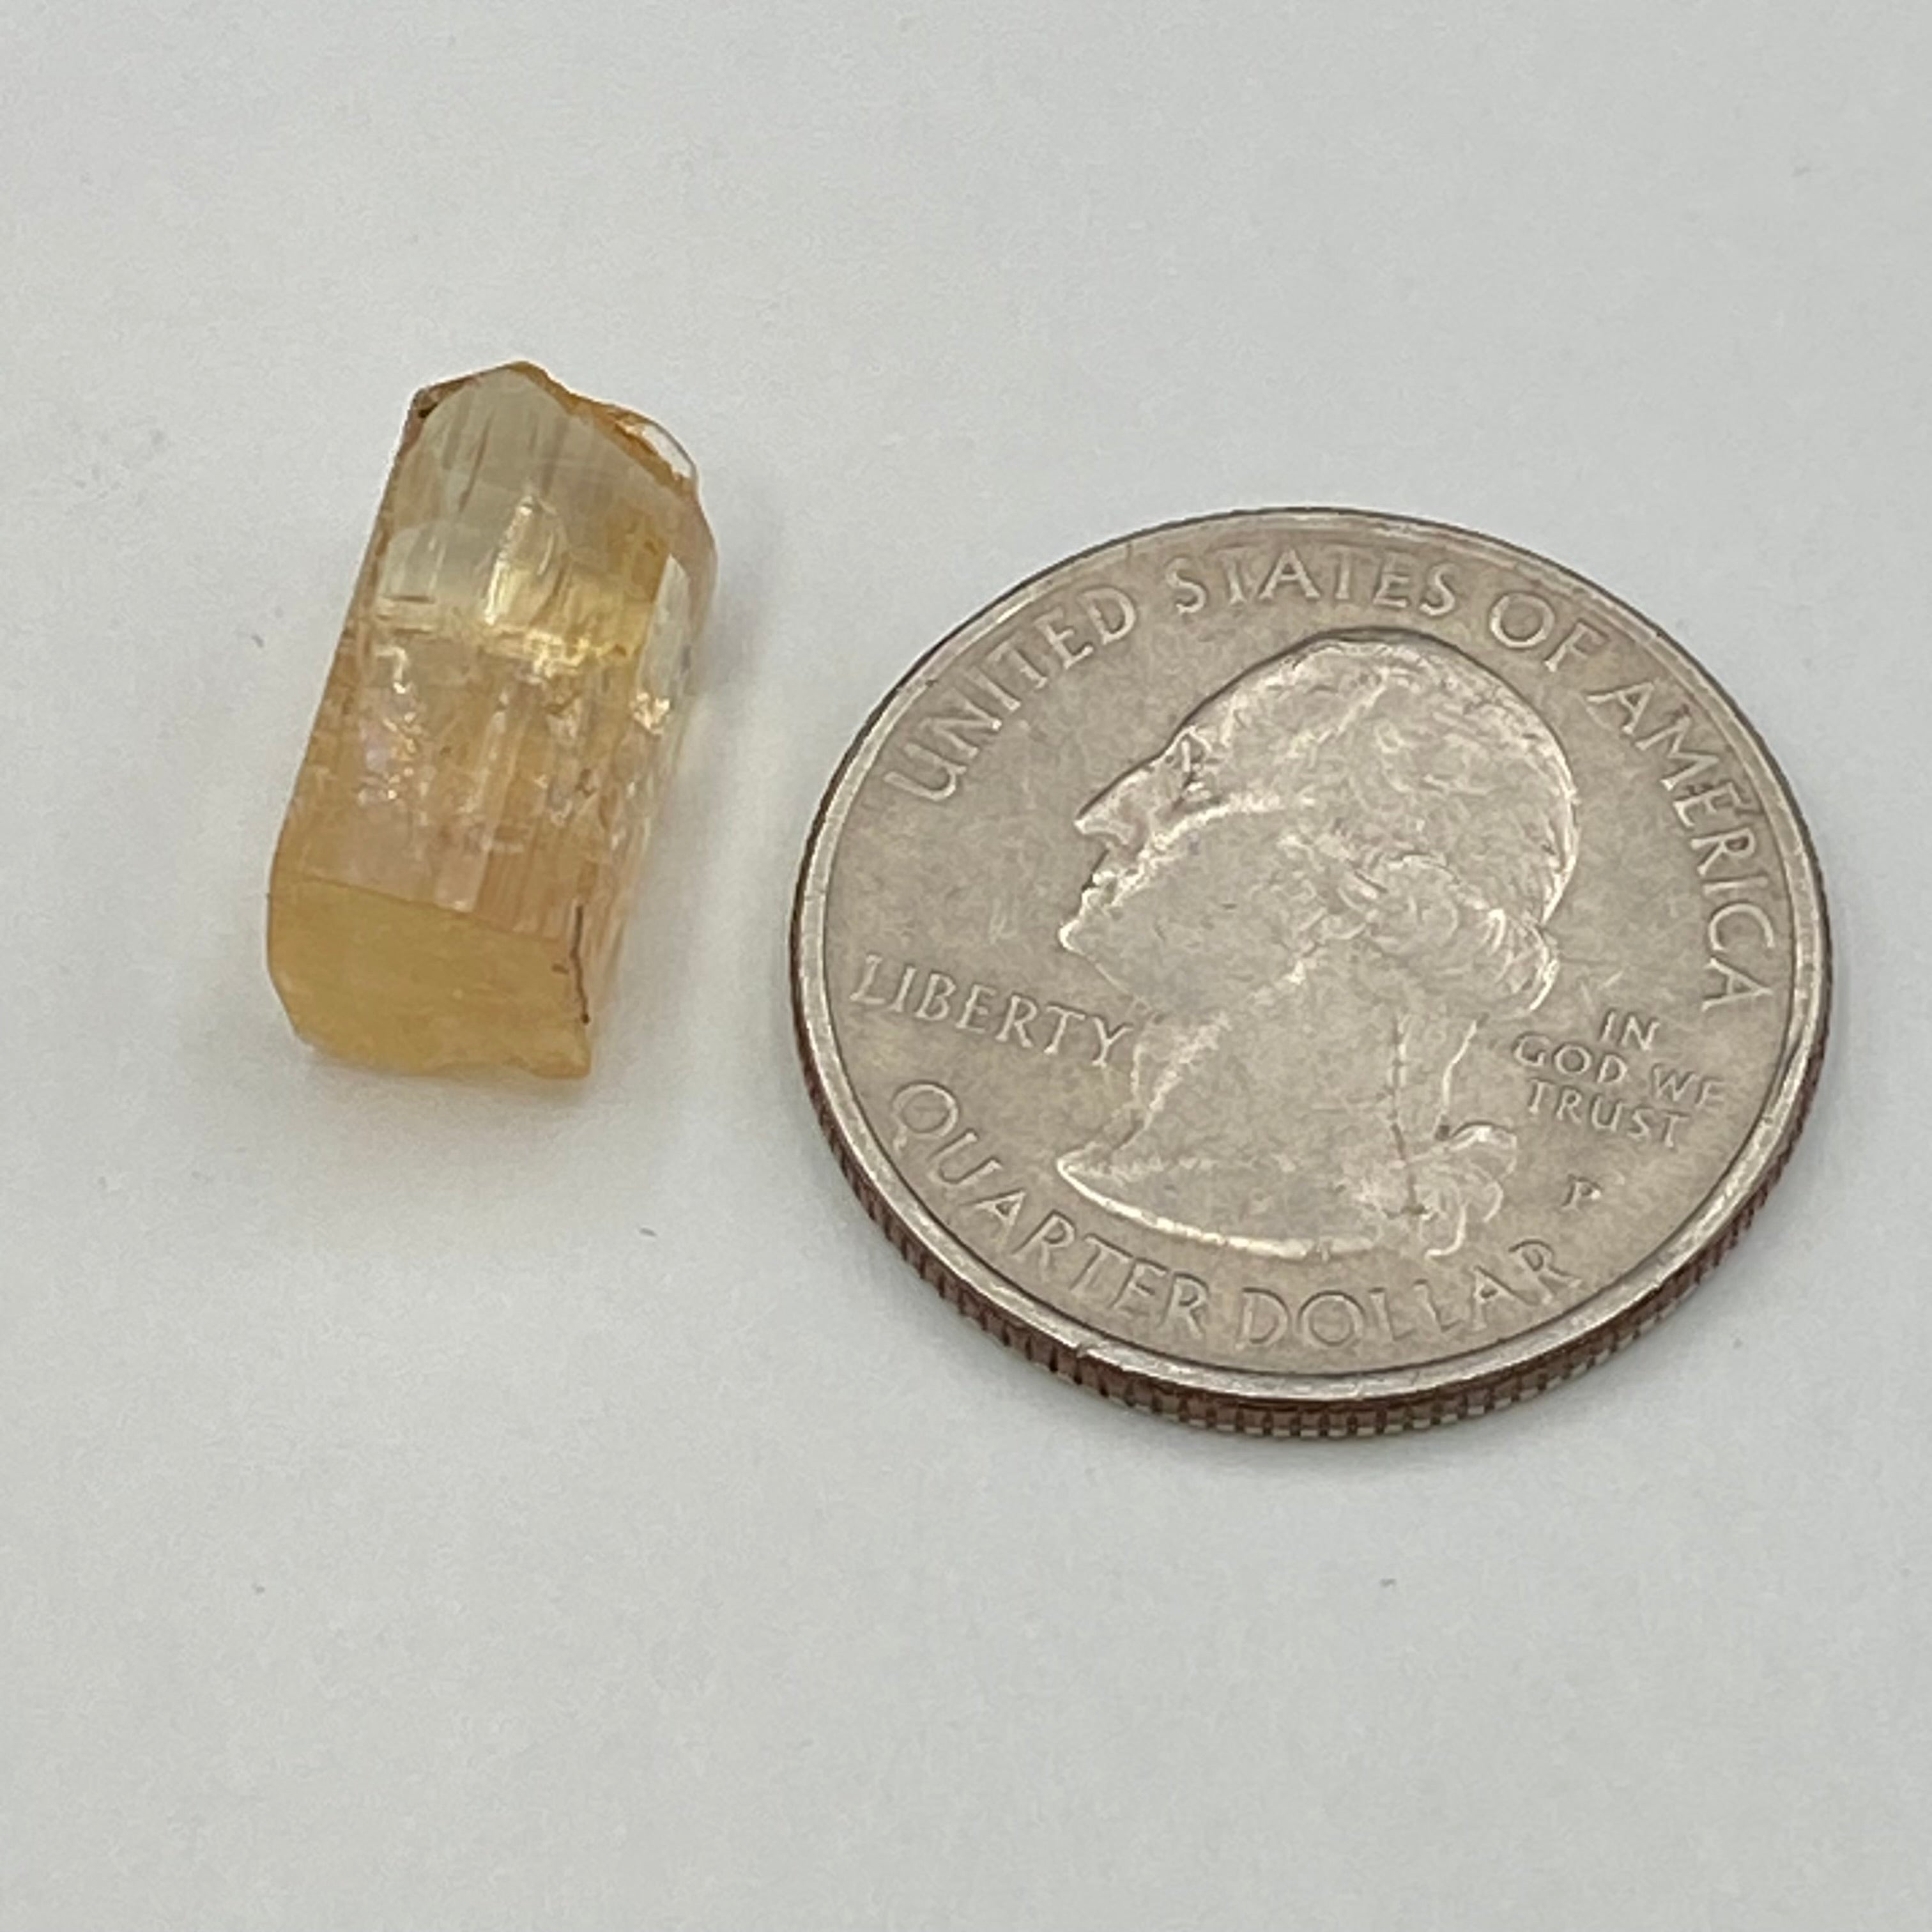 Imperial Topaz Natural Full Terminated Crystal - 187